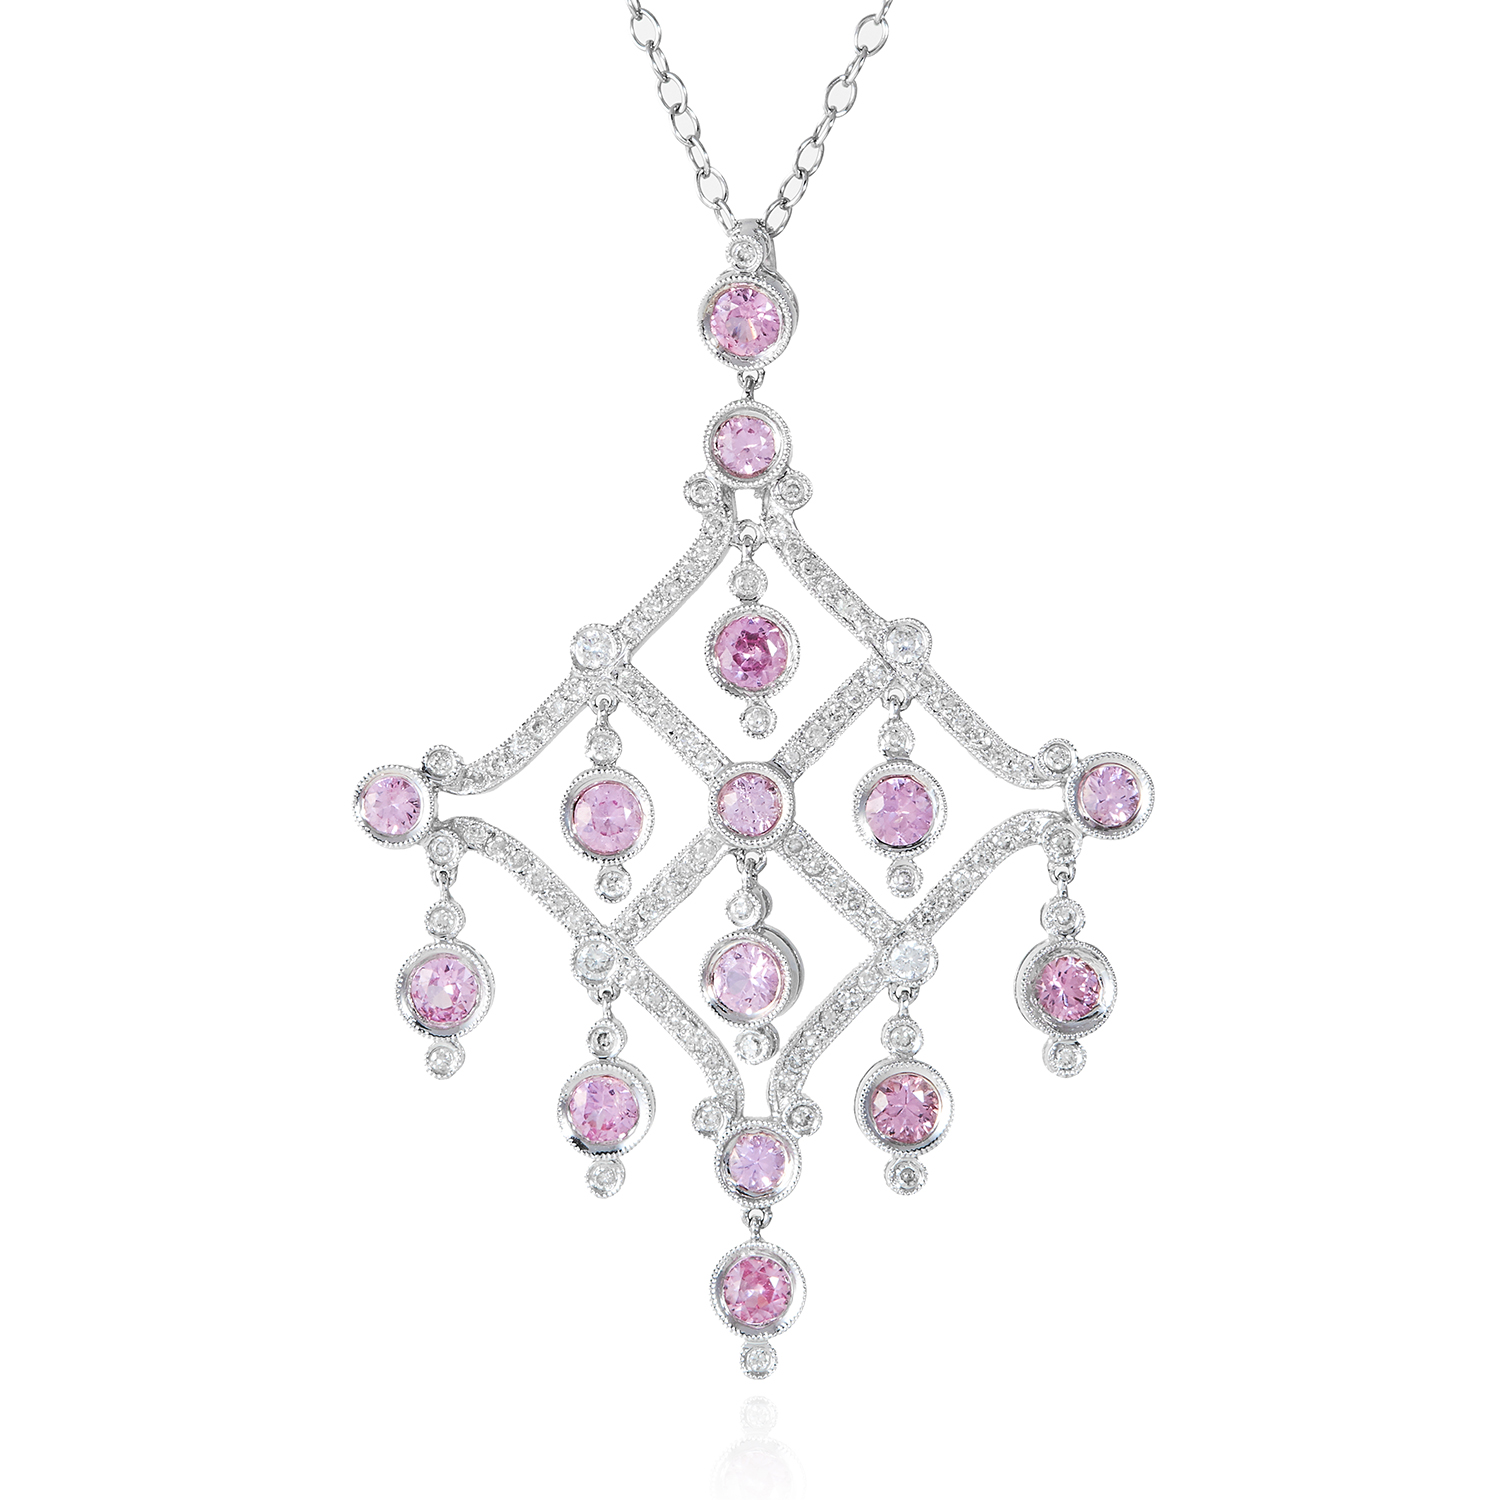 A PINK SAPPHIRE AND DIAMOND NECKLACE in 18ct white gold, suspending pendant jewelled with round